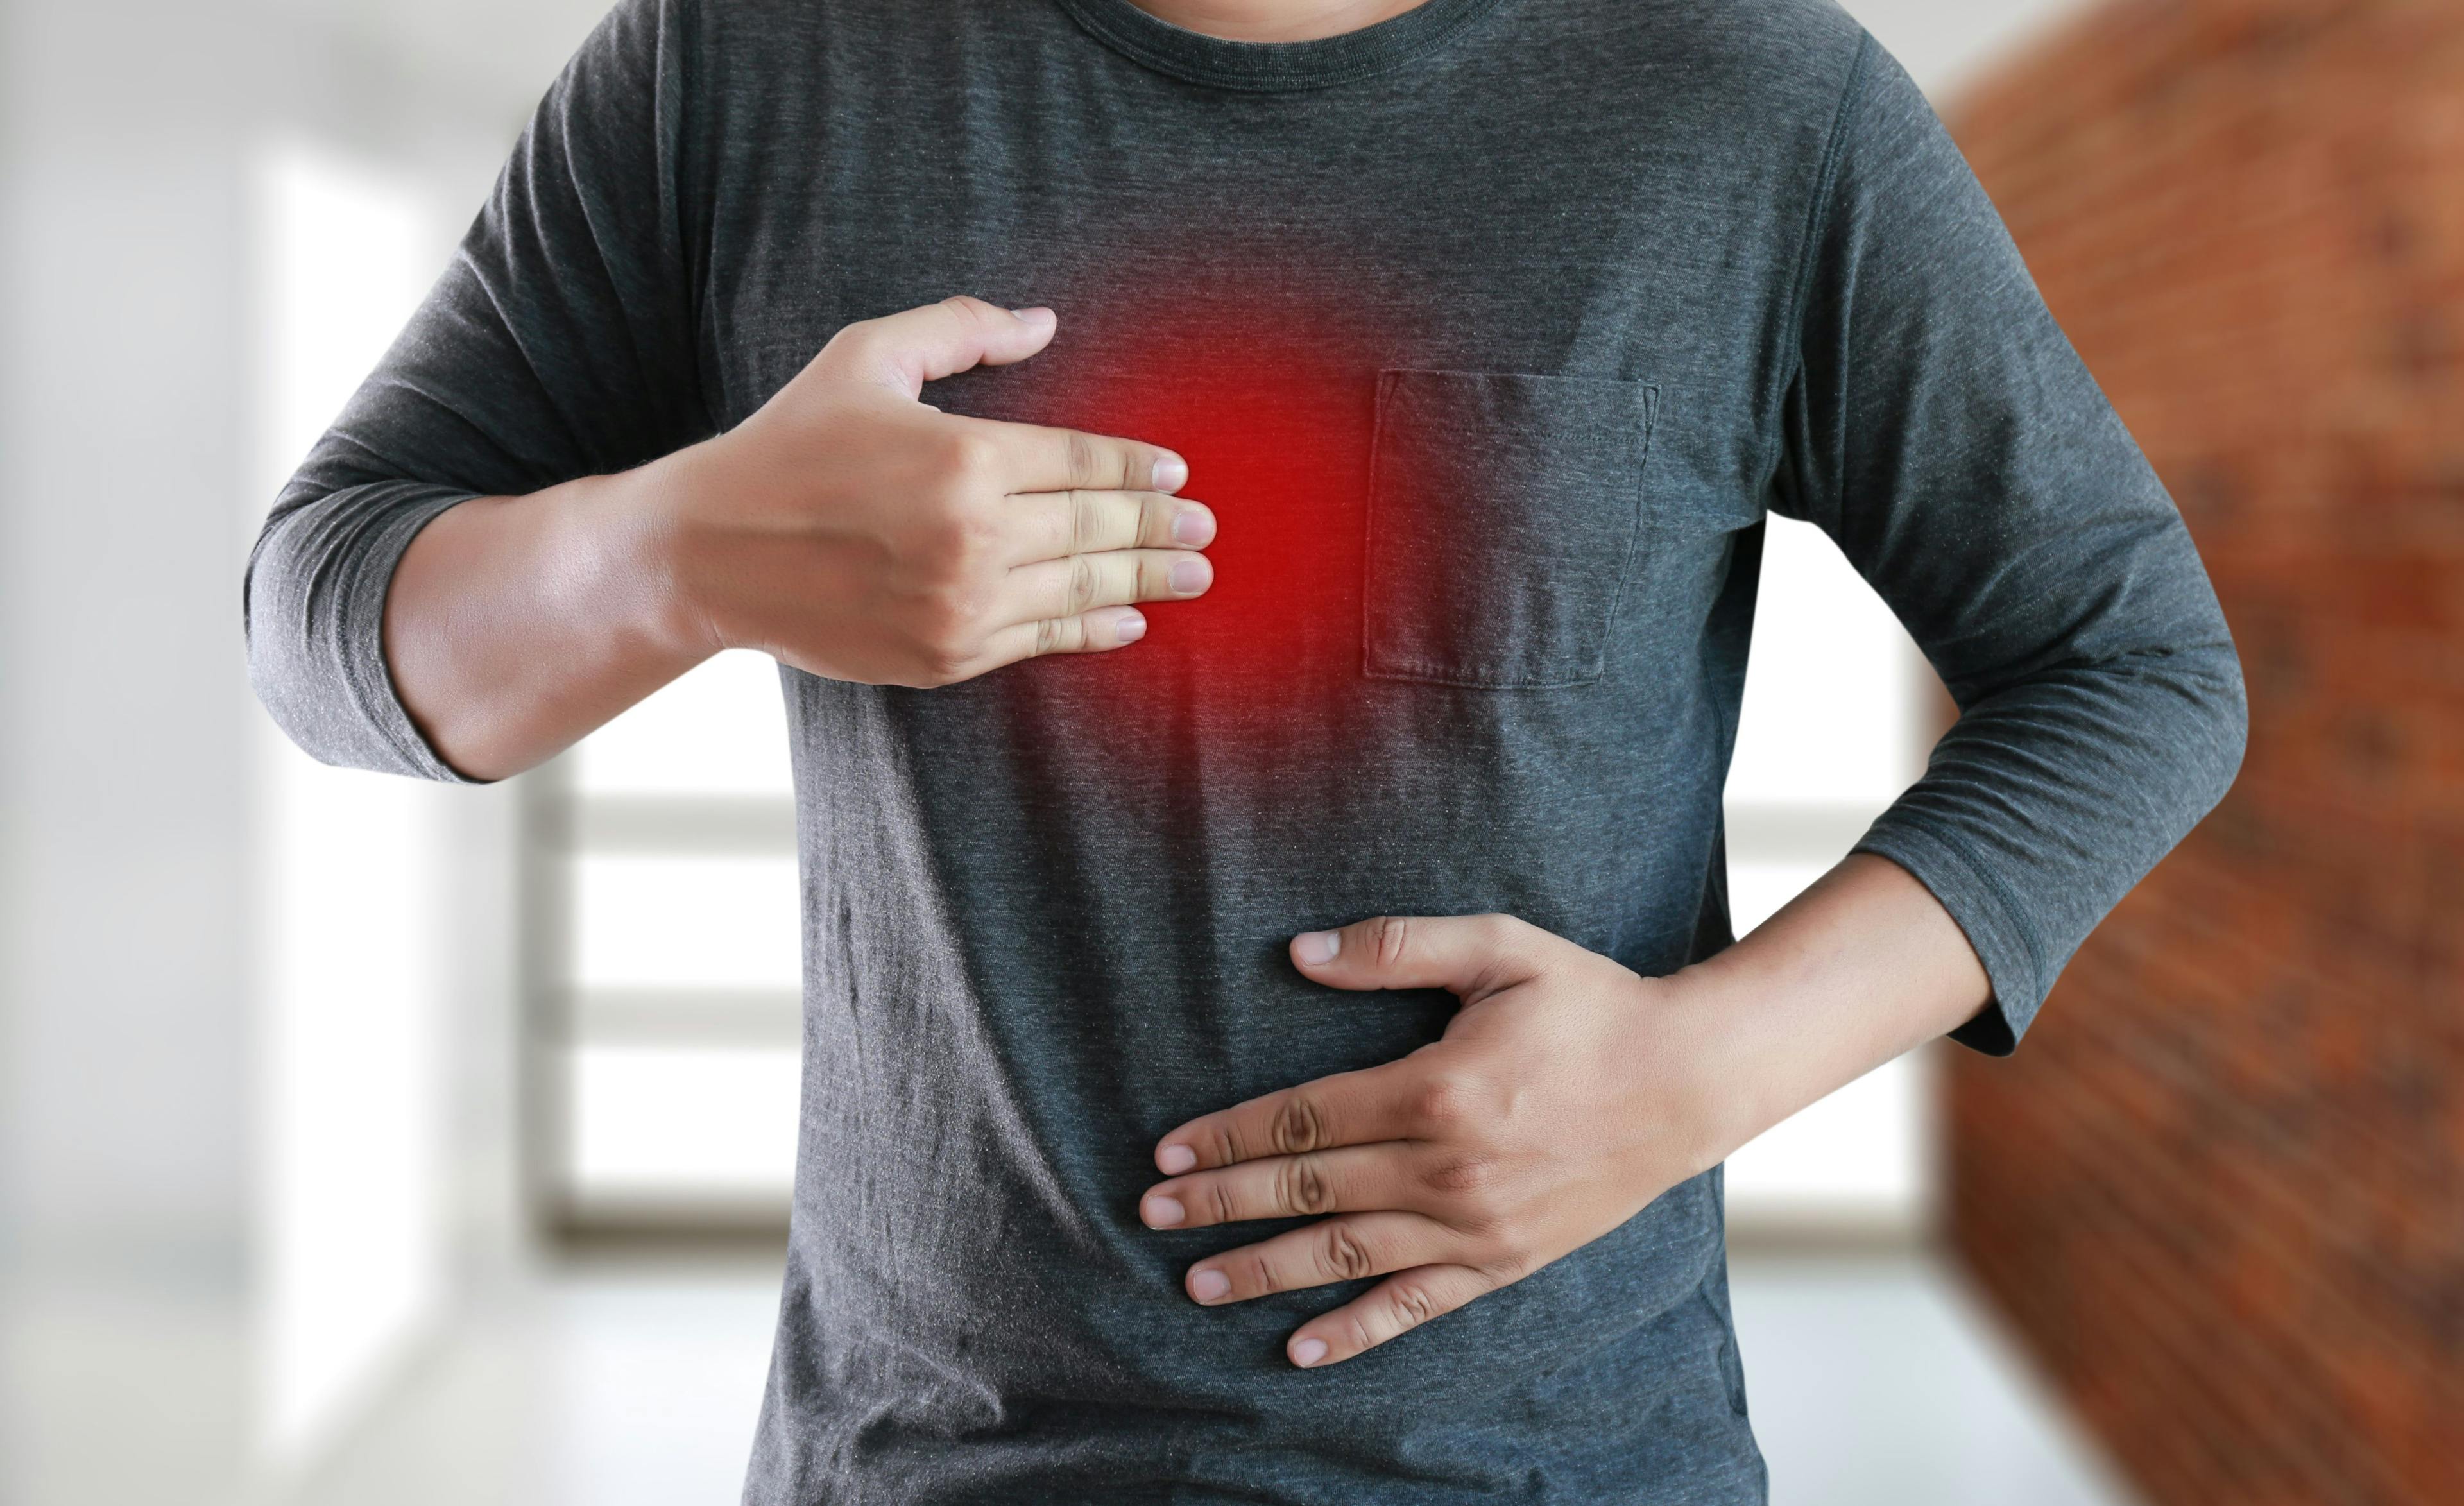 MAN with symptomatic acid reflux , suffering from acid reflux - Image credit: Onephoto | stock.adobe.com 